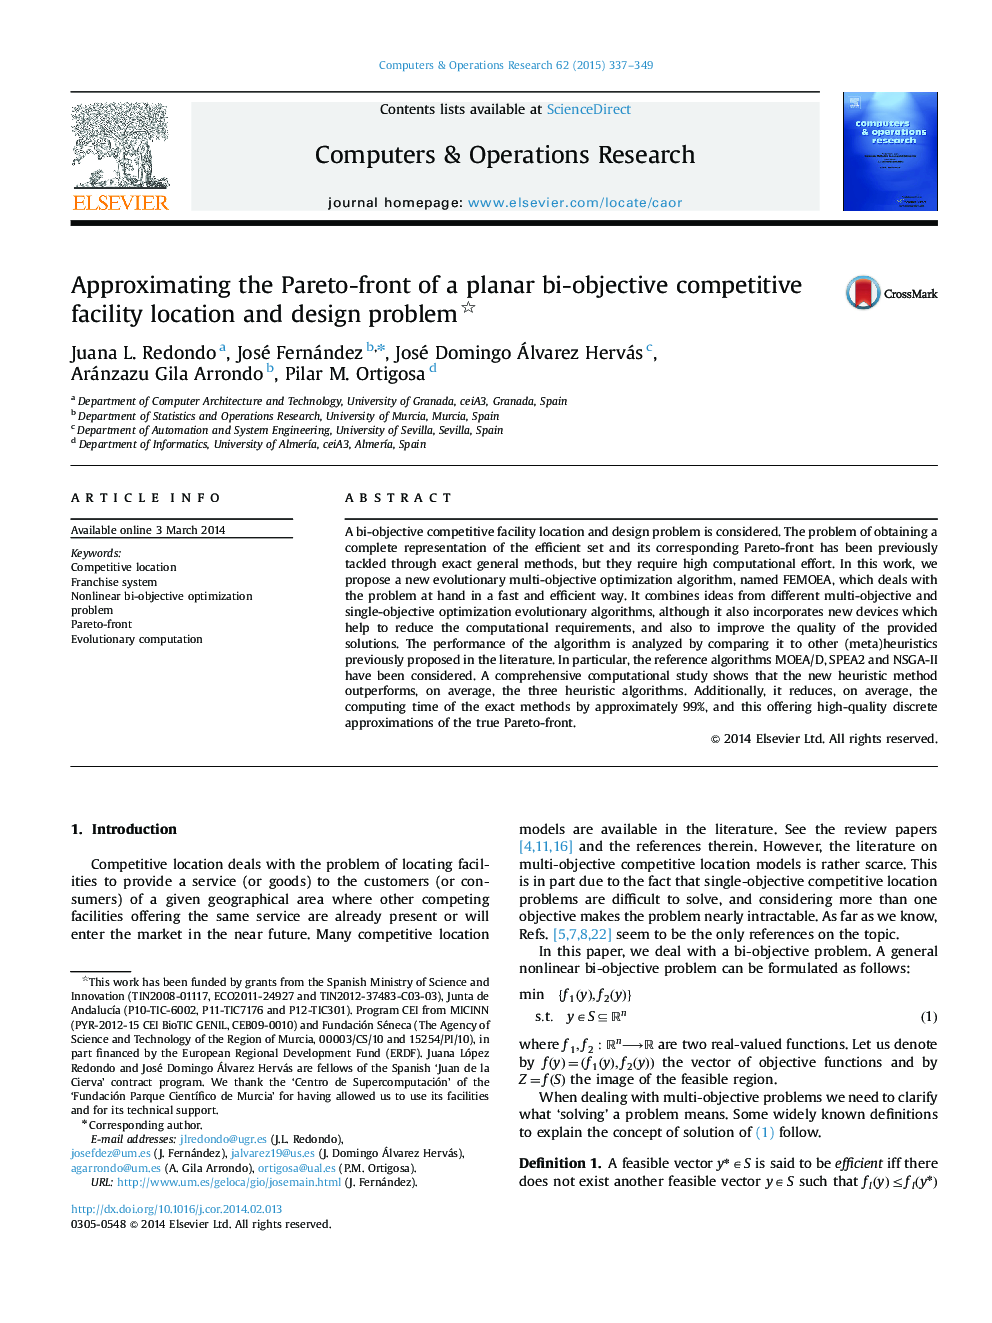 Approximating the Pareto-front of a planar bi-objective competitive facility location and design problem 